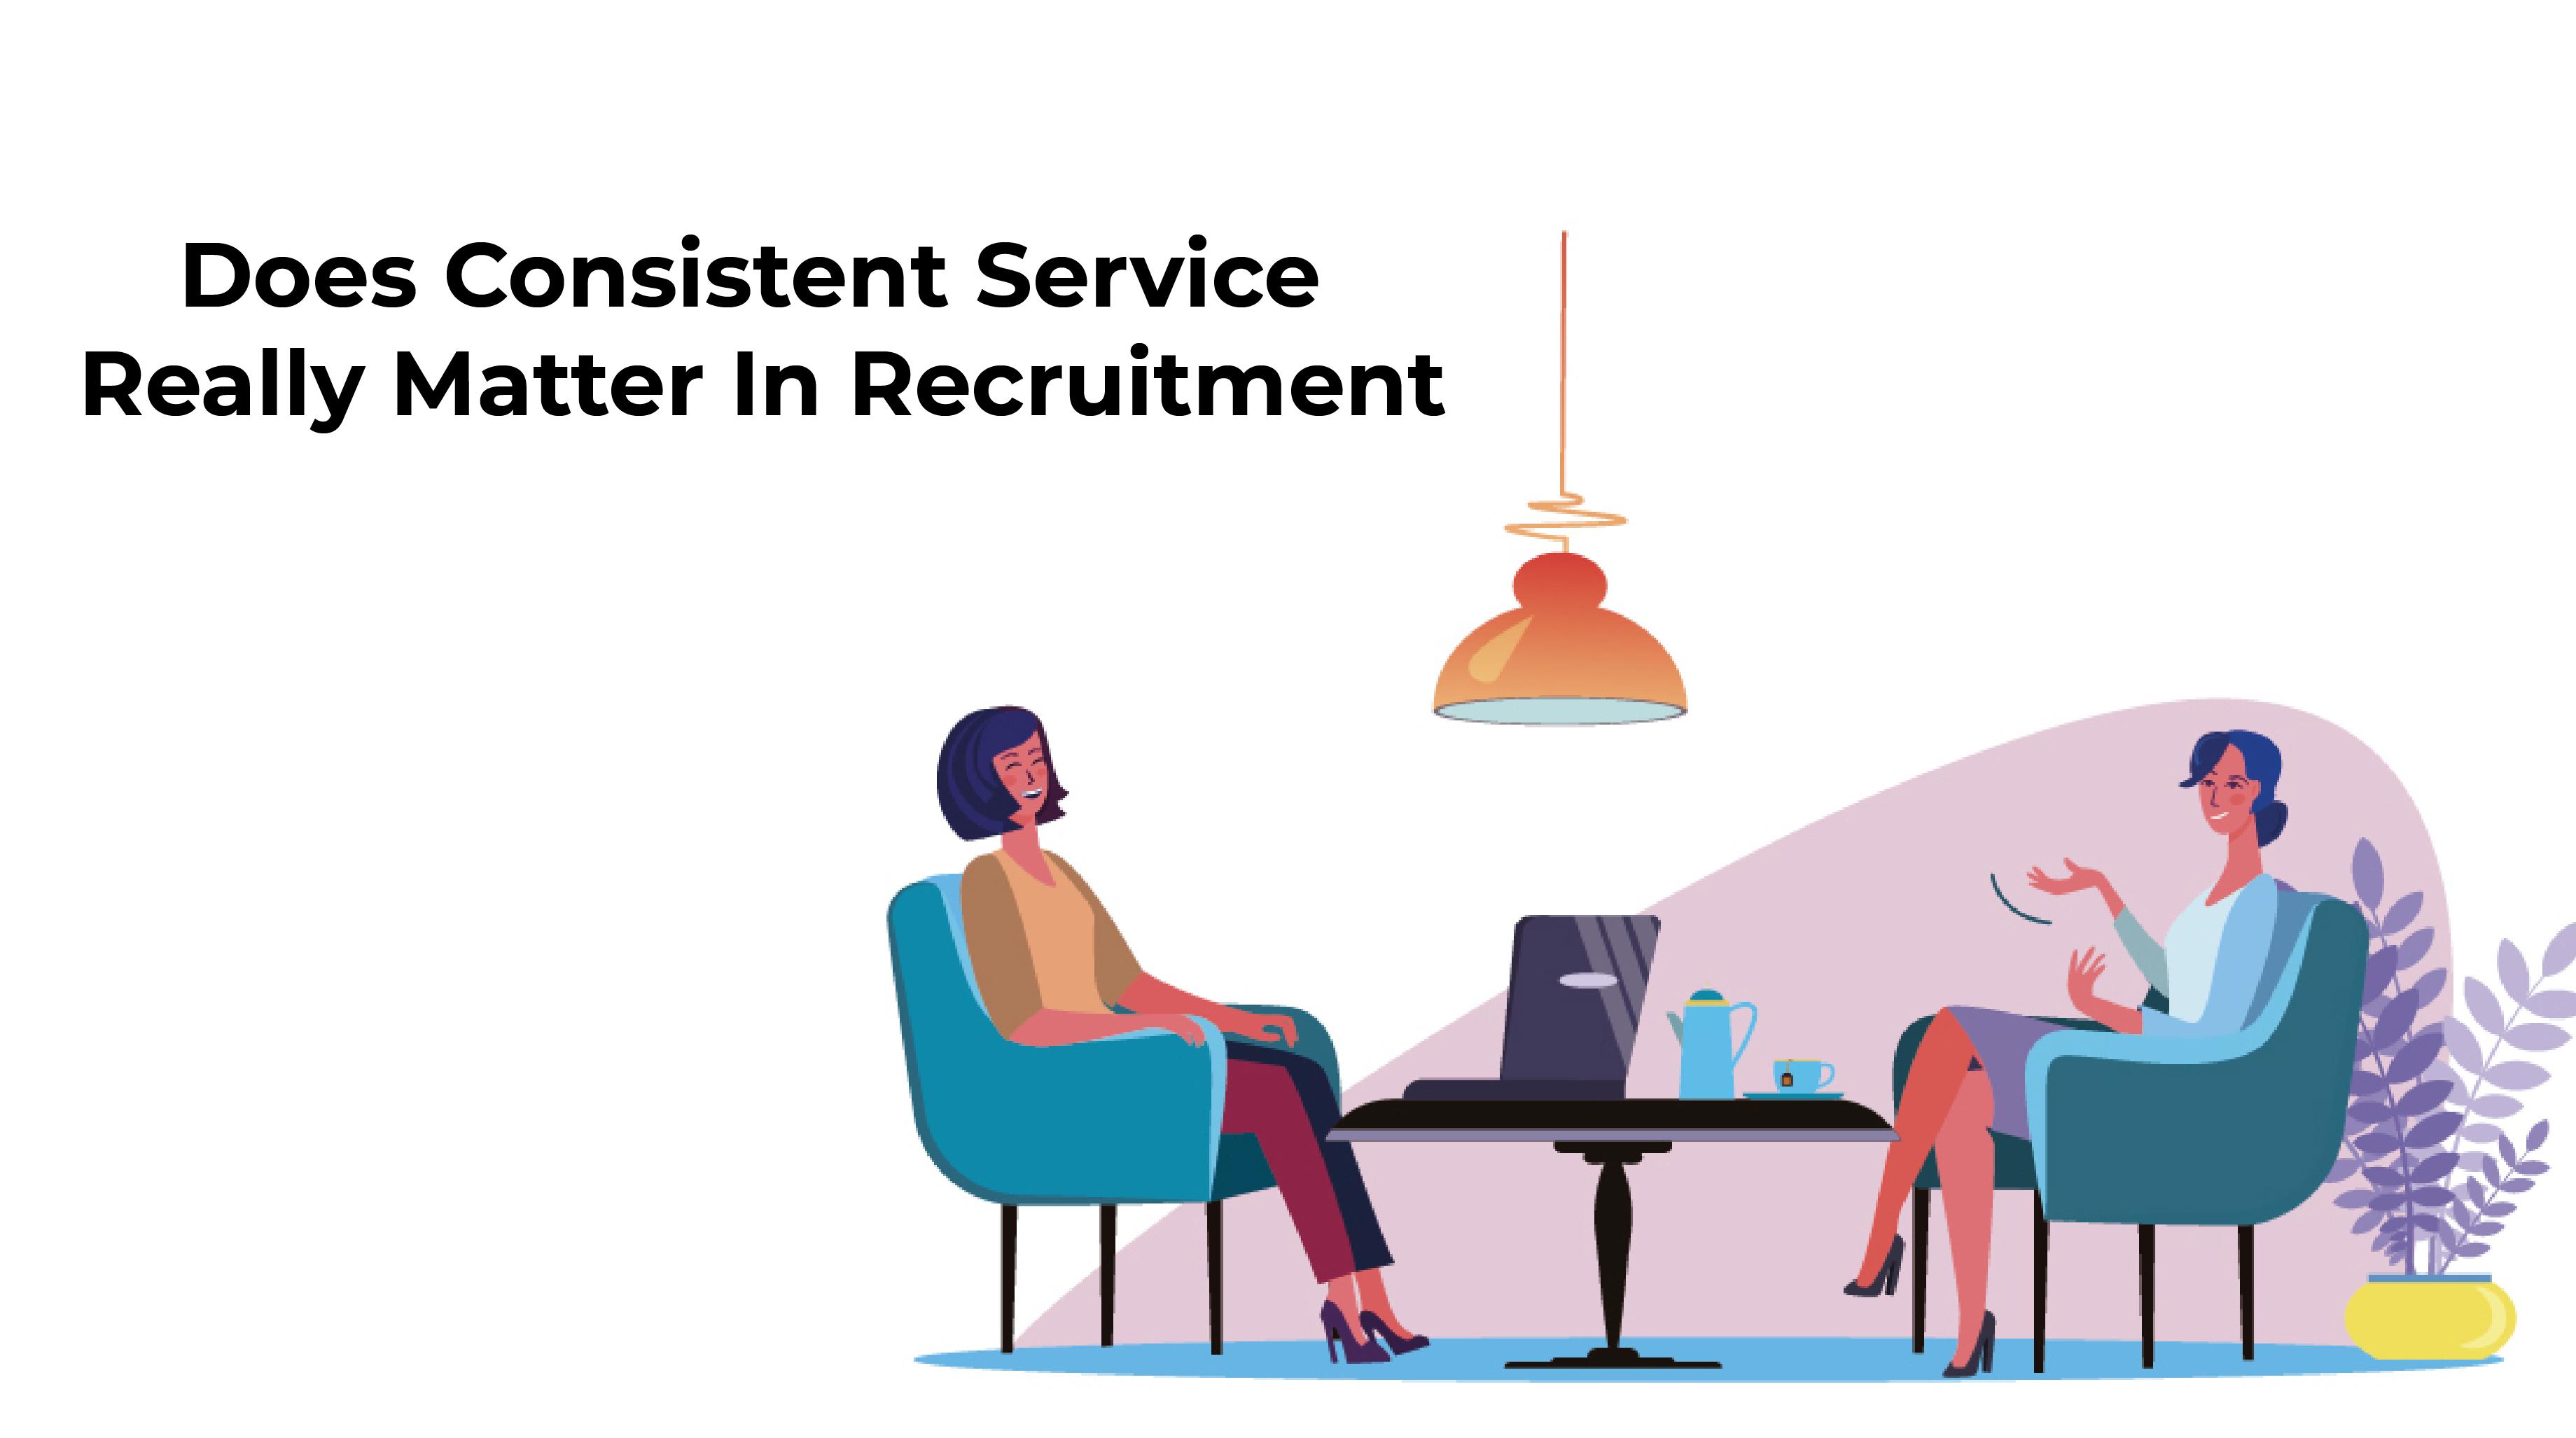 Does Consistent Service Really Matter In Recruitment